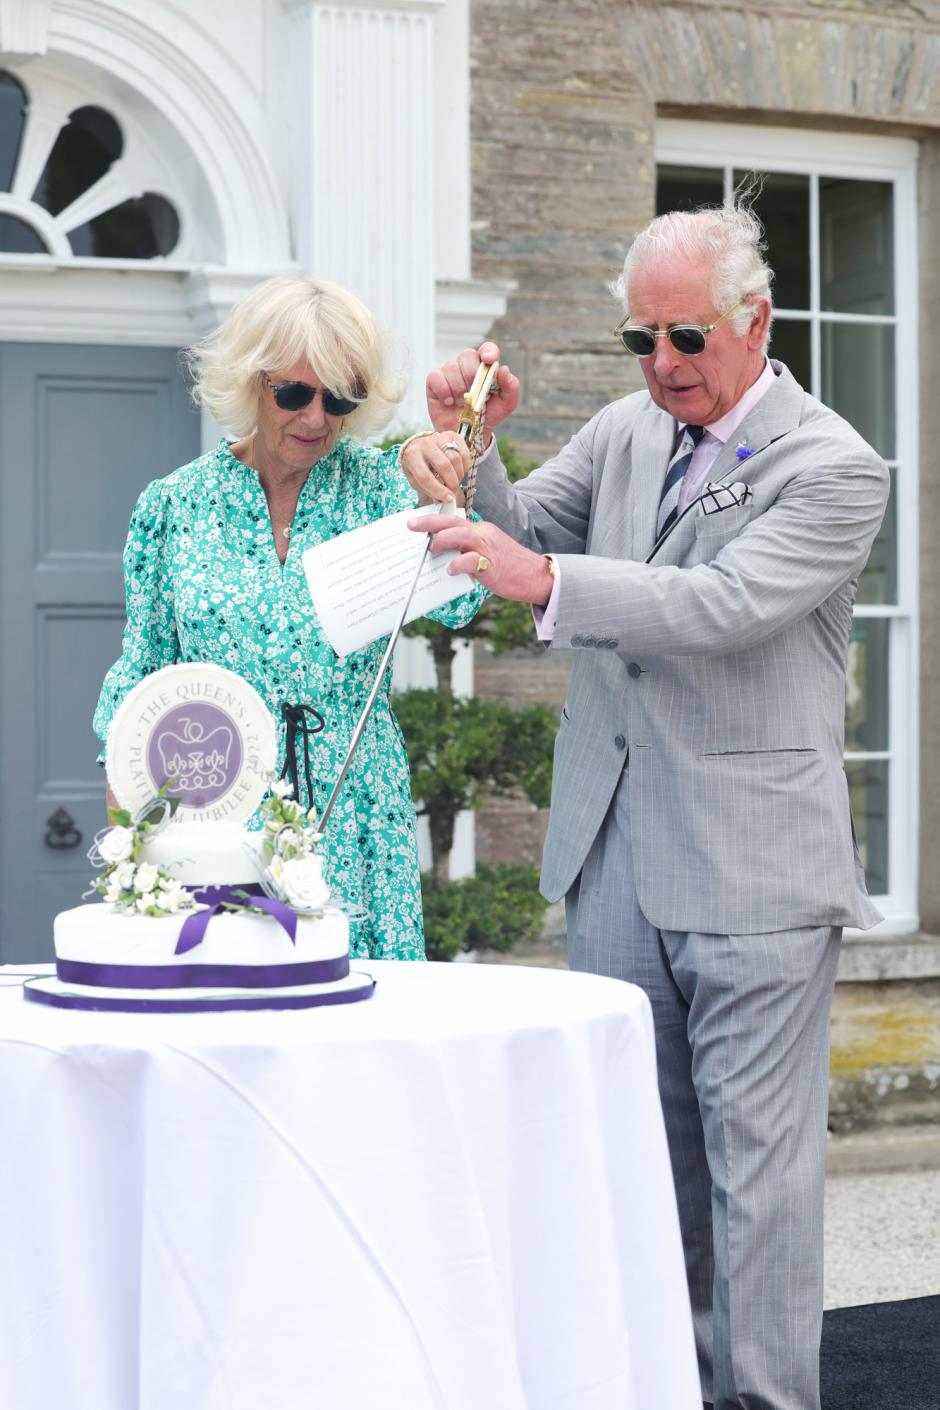 Prince Charles of Wales and Camilla , Duchess of Cornwall in Lostwithiel, Cornwall to mark the 70th anniversary of The Prince of Wales being head of the Duchy of Cornwall on the first day of their annual visit to the South West. Picture date: Monday July 18, 2022.